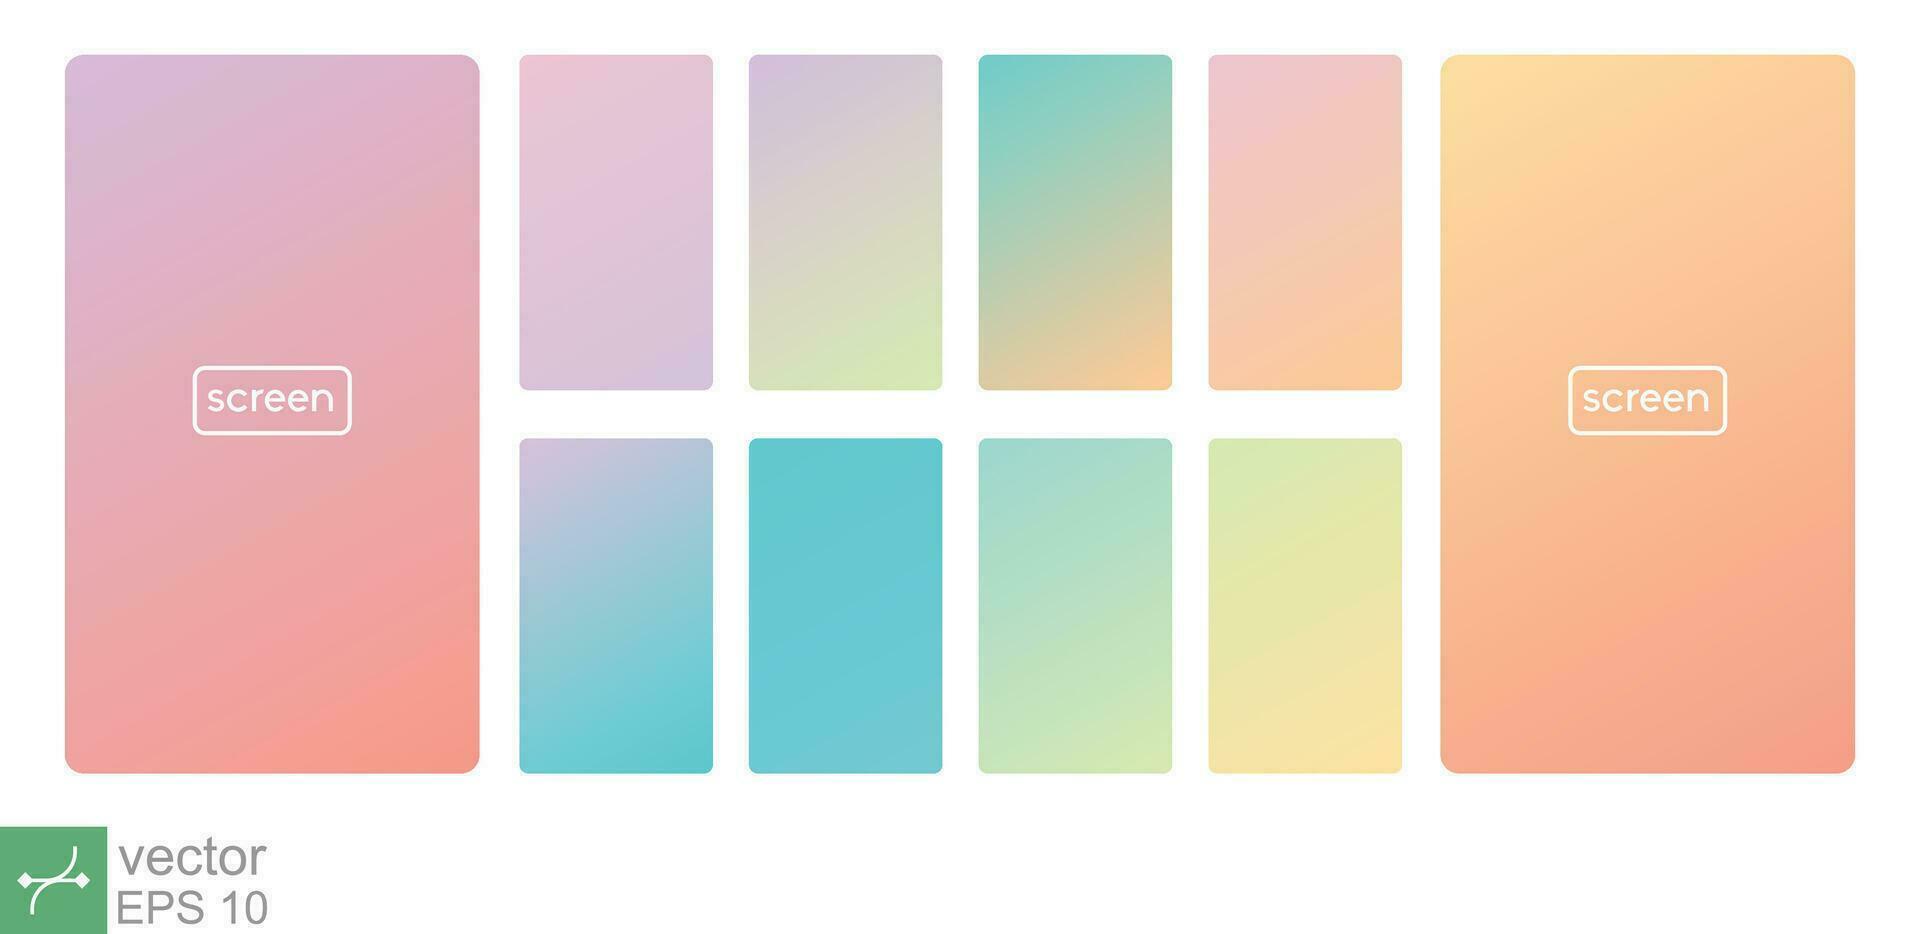 Vibrant and smooth pastel gradient soft colors set for devices, pc and modern smartphone screen backgrounds set vector ux and ui design. Vector illustration EPS 10.